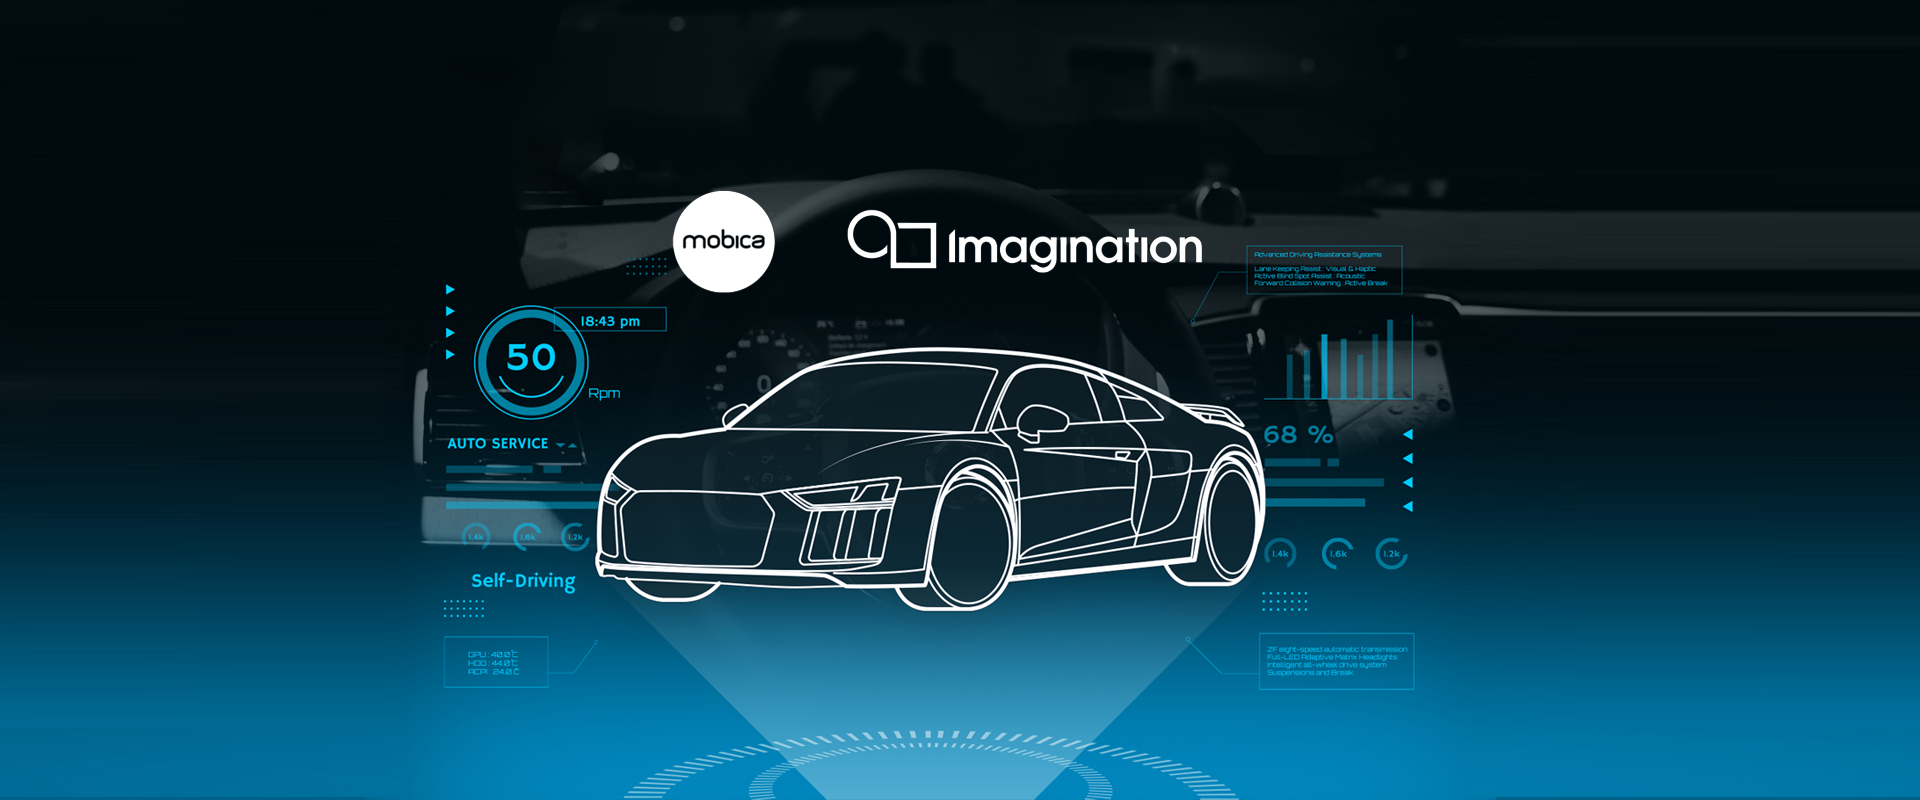 Imagination and Mobica create virtualized automotive environment